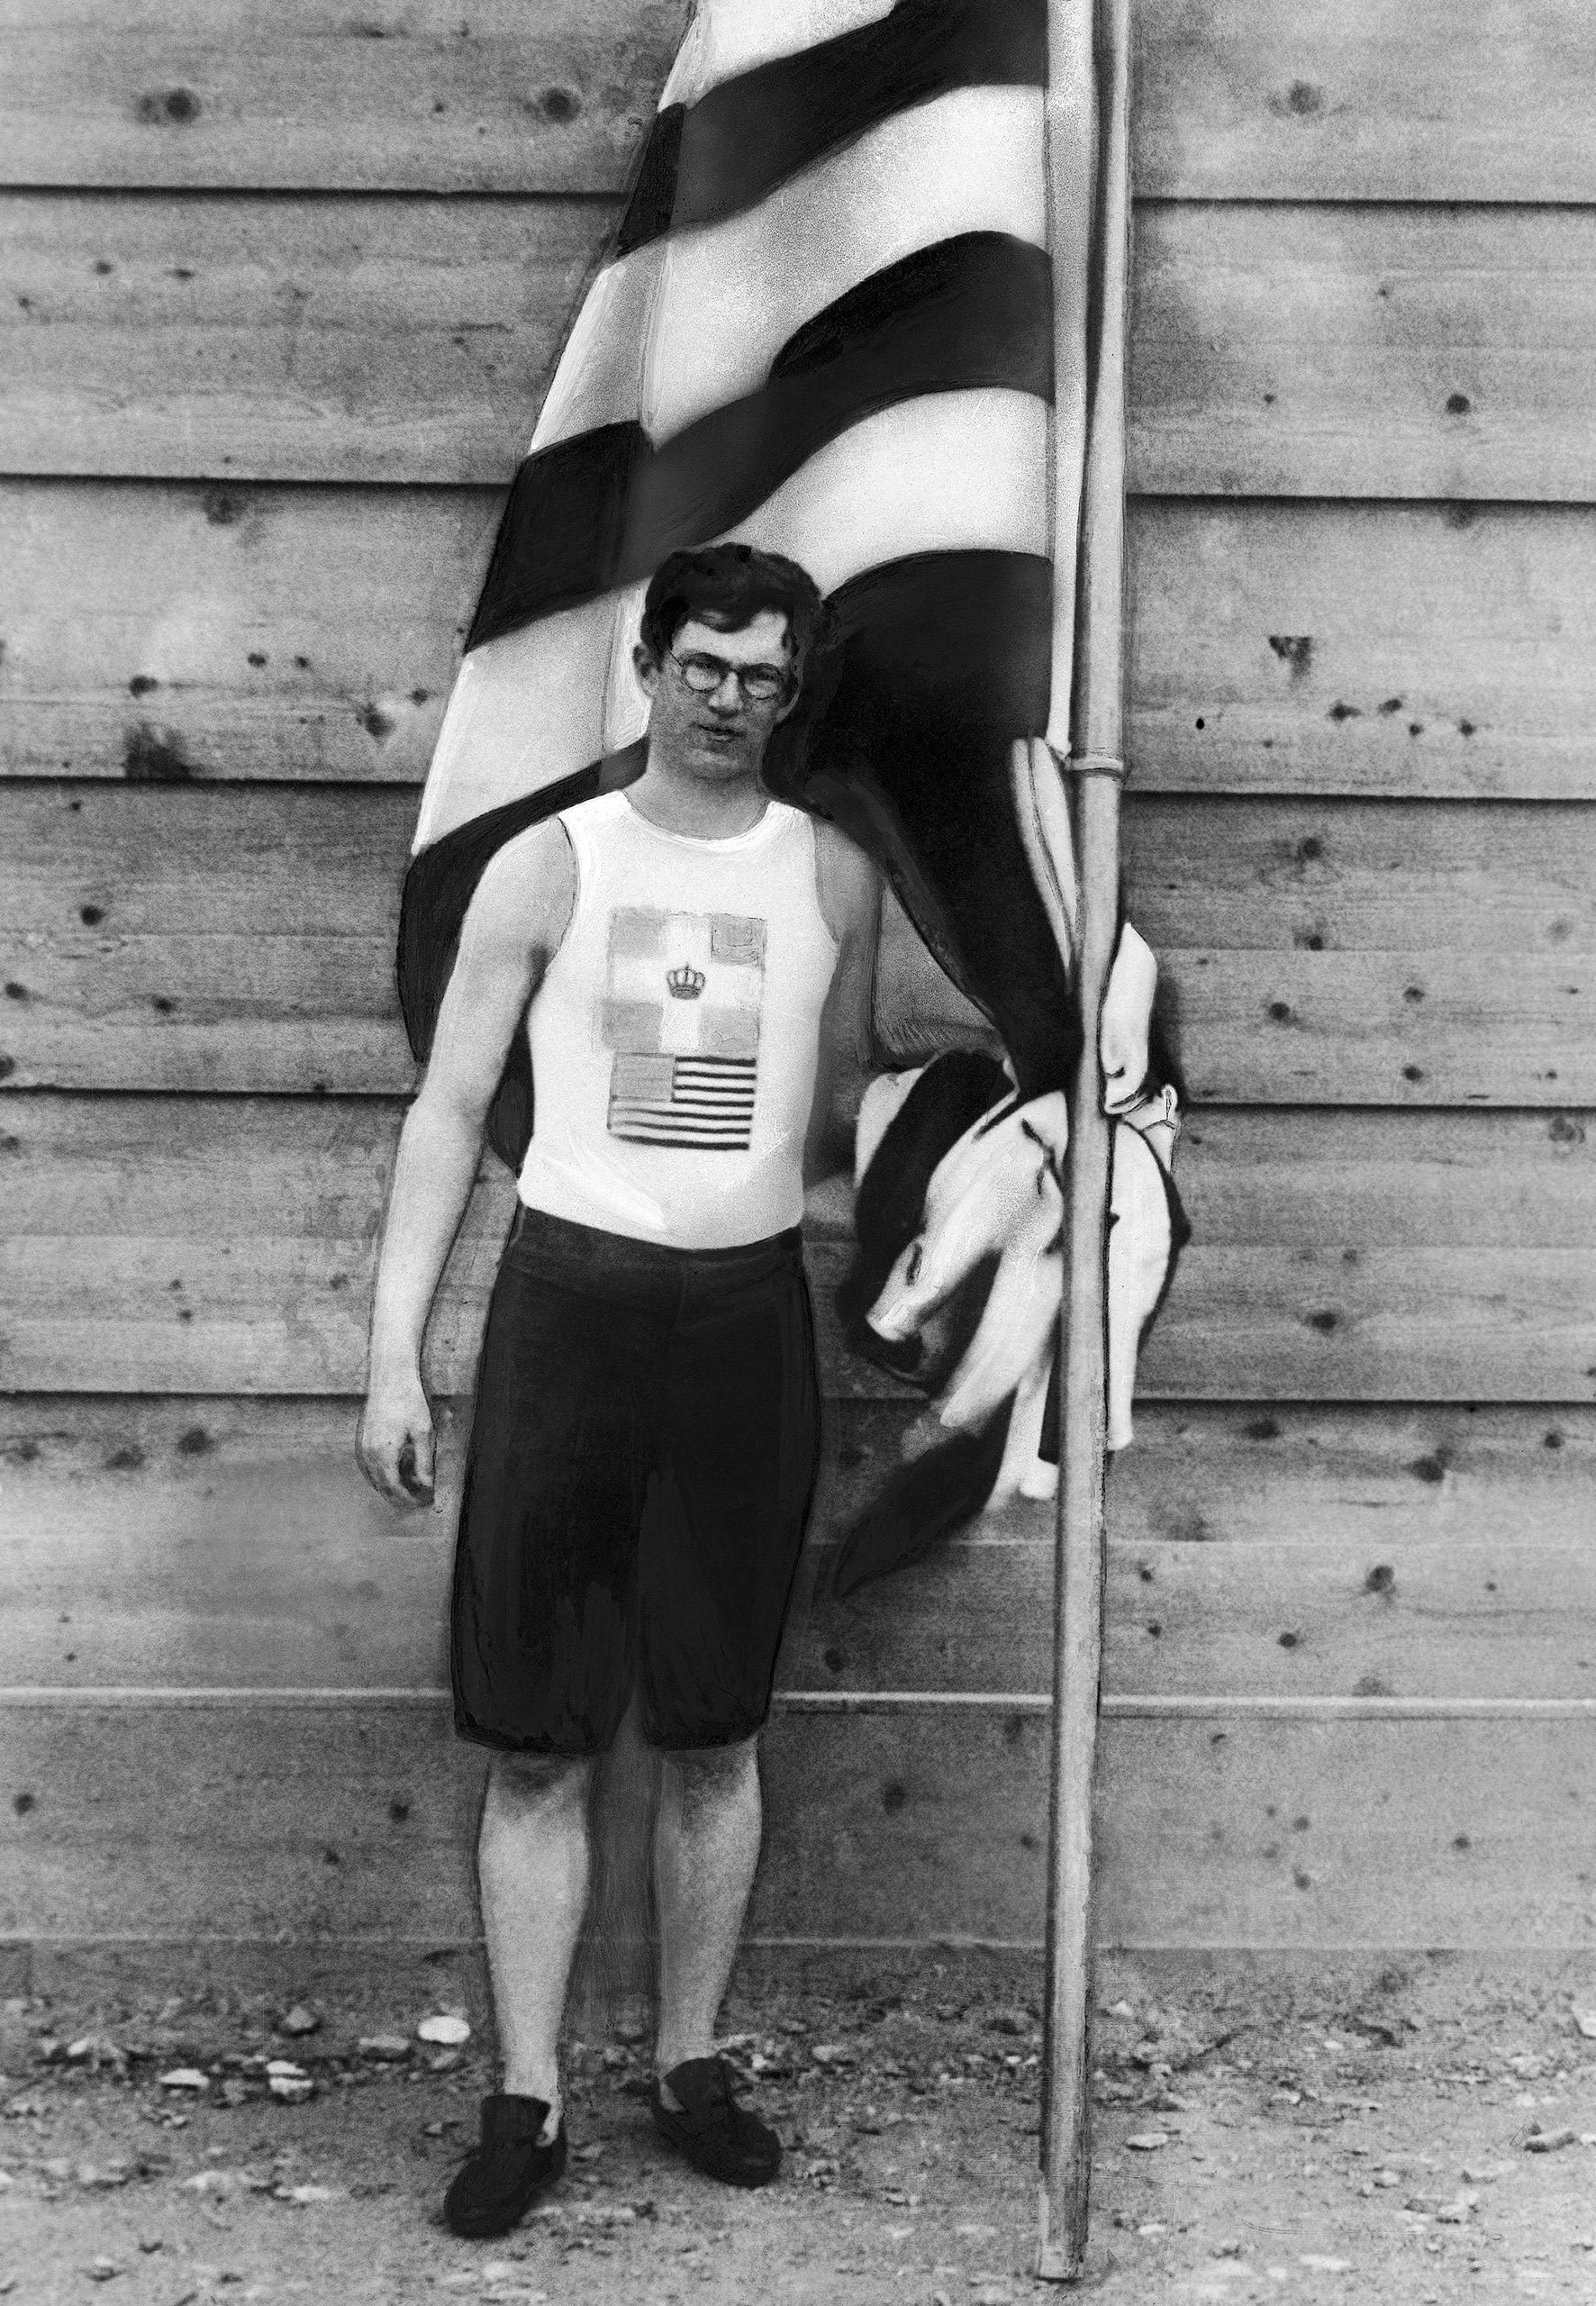 Harvard student Ellery Harding Clark from Boston, USA, poses with a flag at the first modern International Summer Olympic Games held at the Panathinaiko Stadium on April 7, 1896 in Athens, Greece where he won the gold medal both in high jump (2.81 meters) and long jump (6.35 meters).